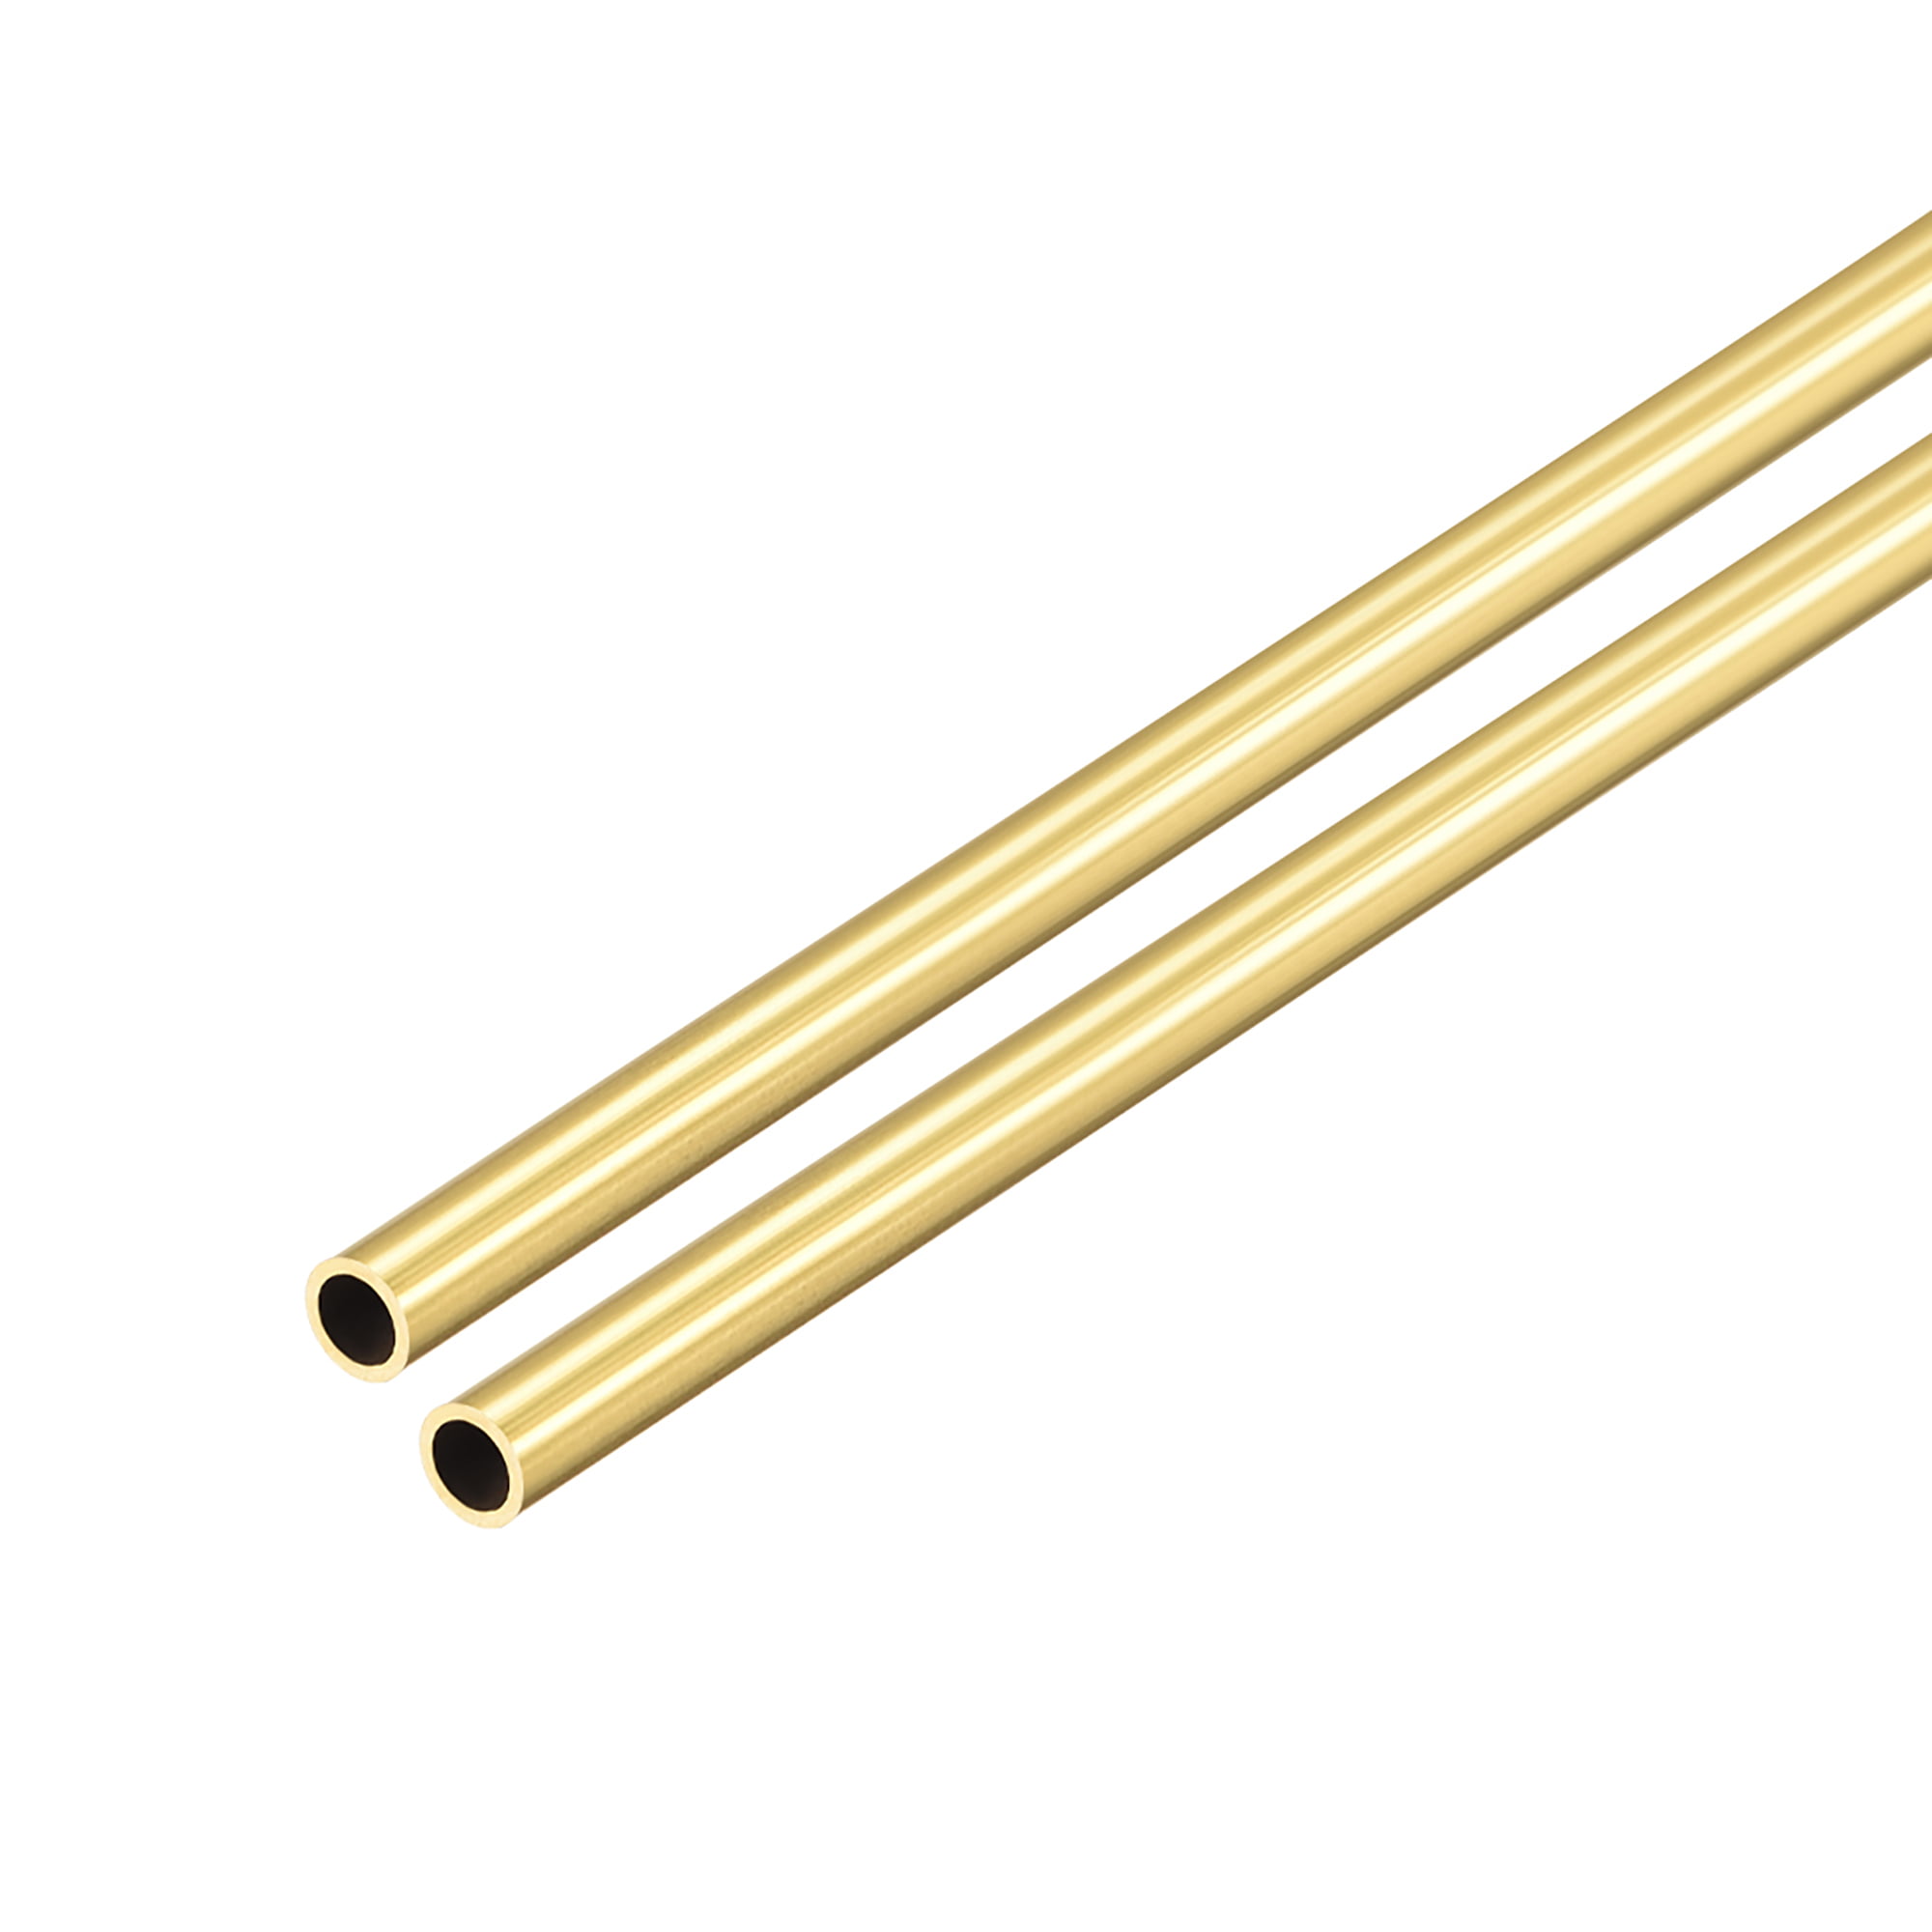 uxcell 2PCS 4.5mm x 5mm x 500mm Brass Pipe Tube Round Bar Rod for RC Boat 